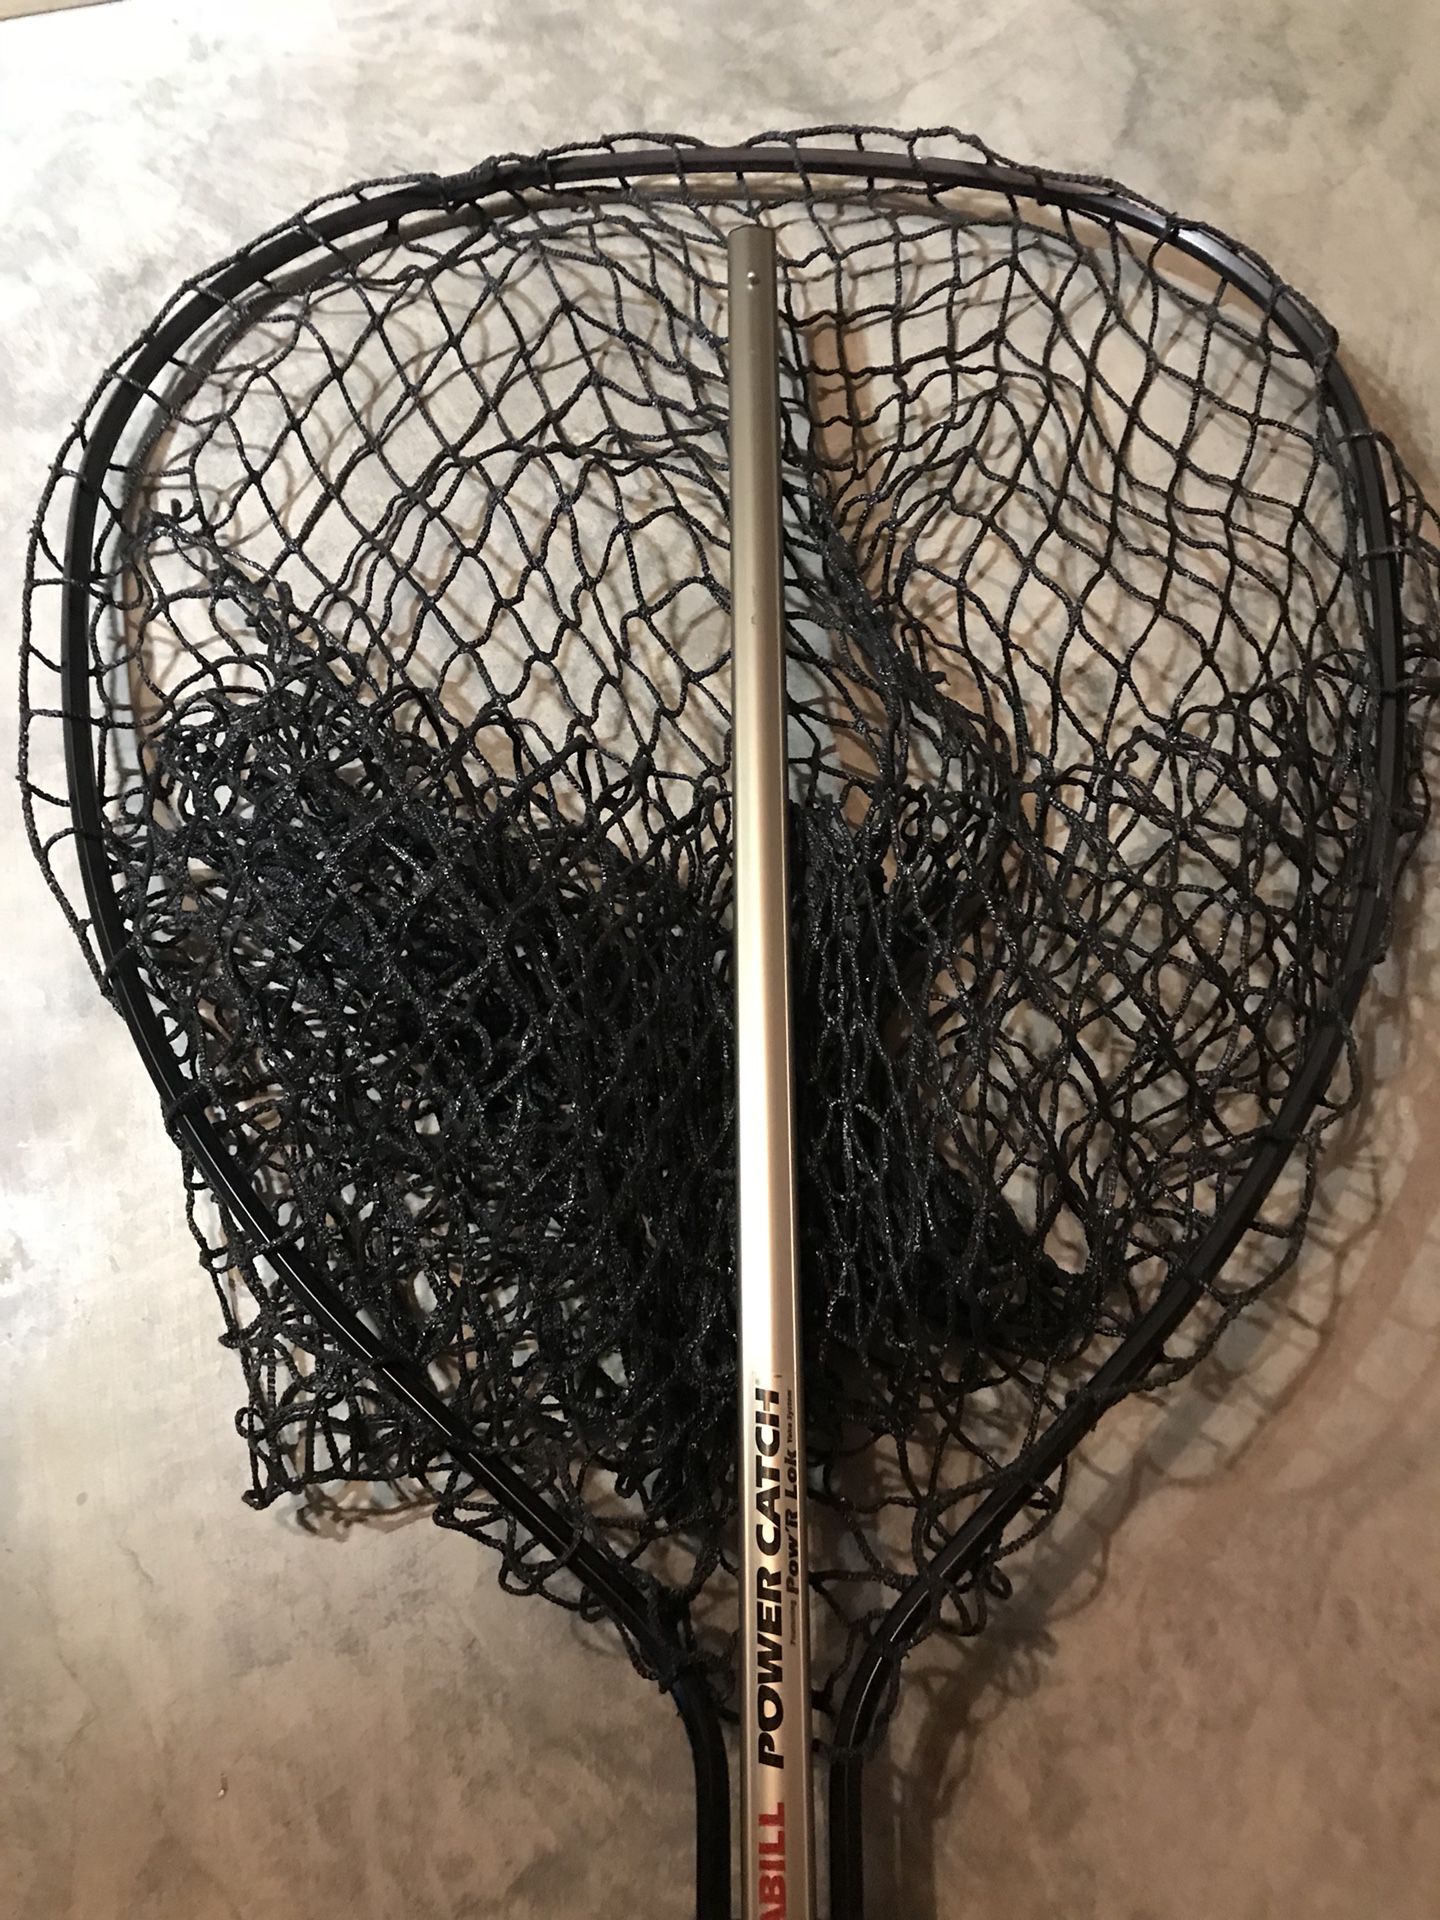 Frabill Power Catch Musky Net with Treated Bag for Sale in Lake Zurich, IL  - OfferUp